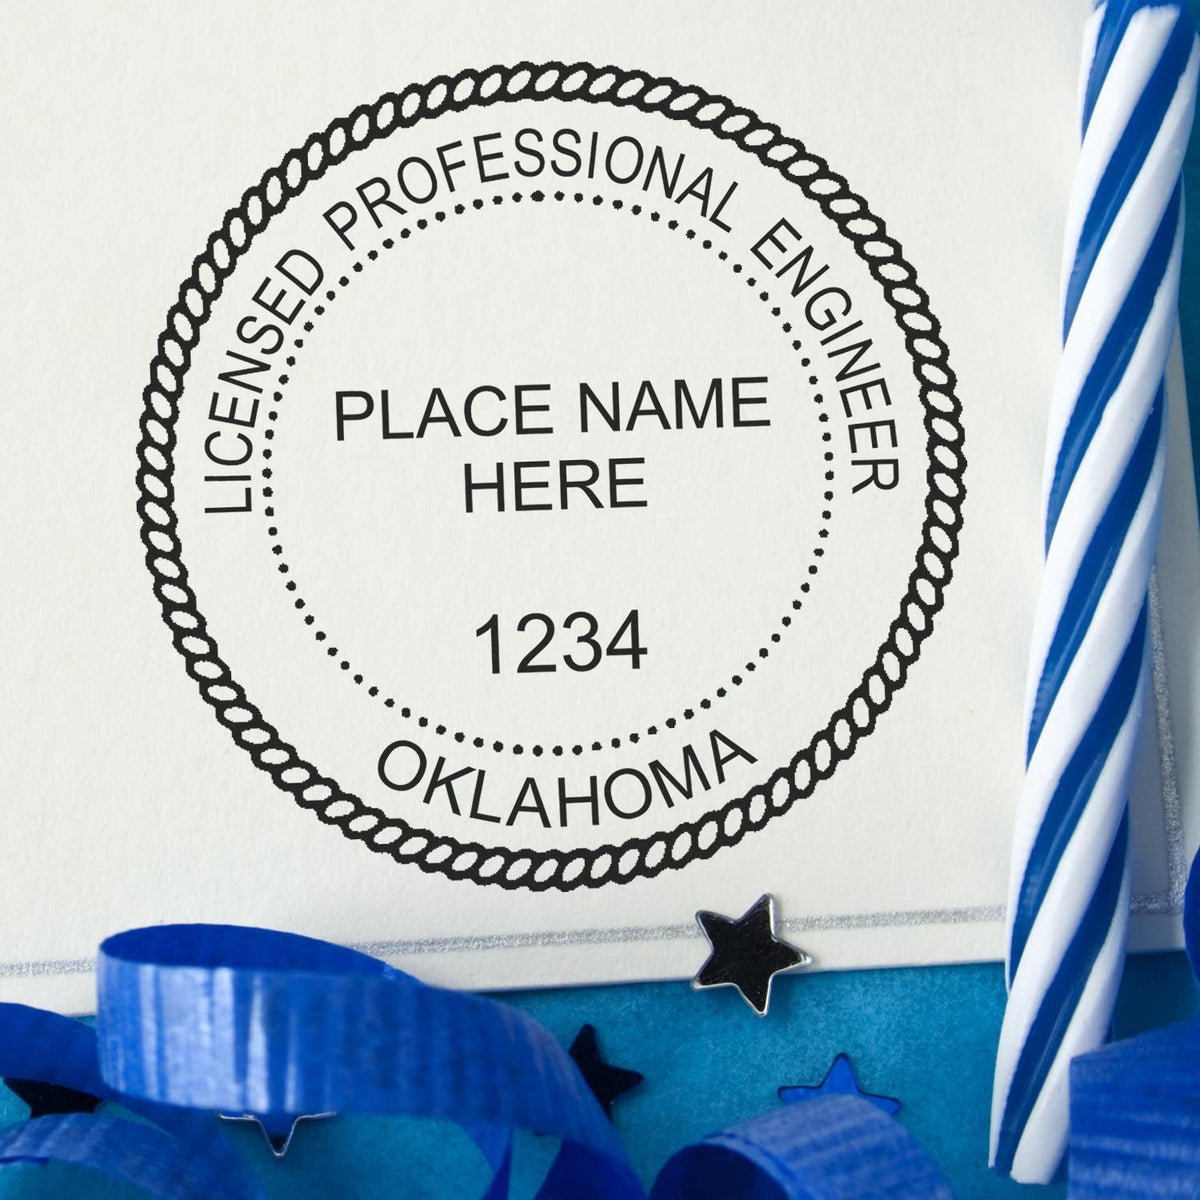 A stamped impression of the Premium MaxLight Pre-Inked Oklahoma Engineering Stamp in this stylish lifestyle photo, setting the tone for a unique and personalized product.